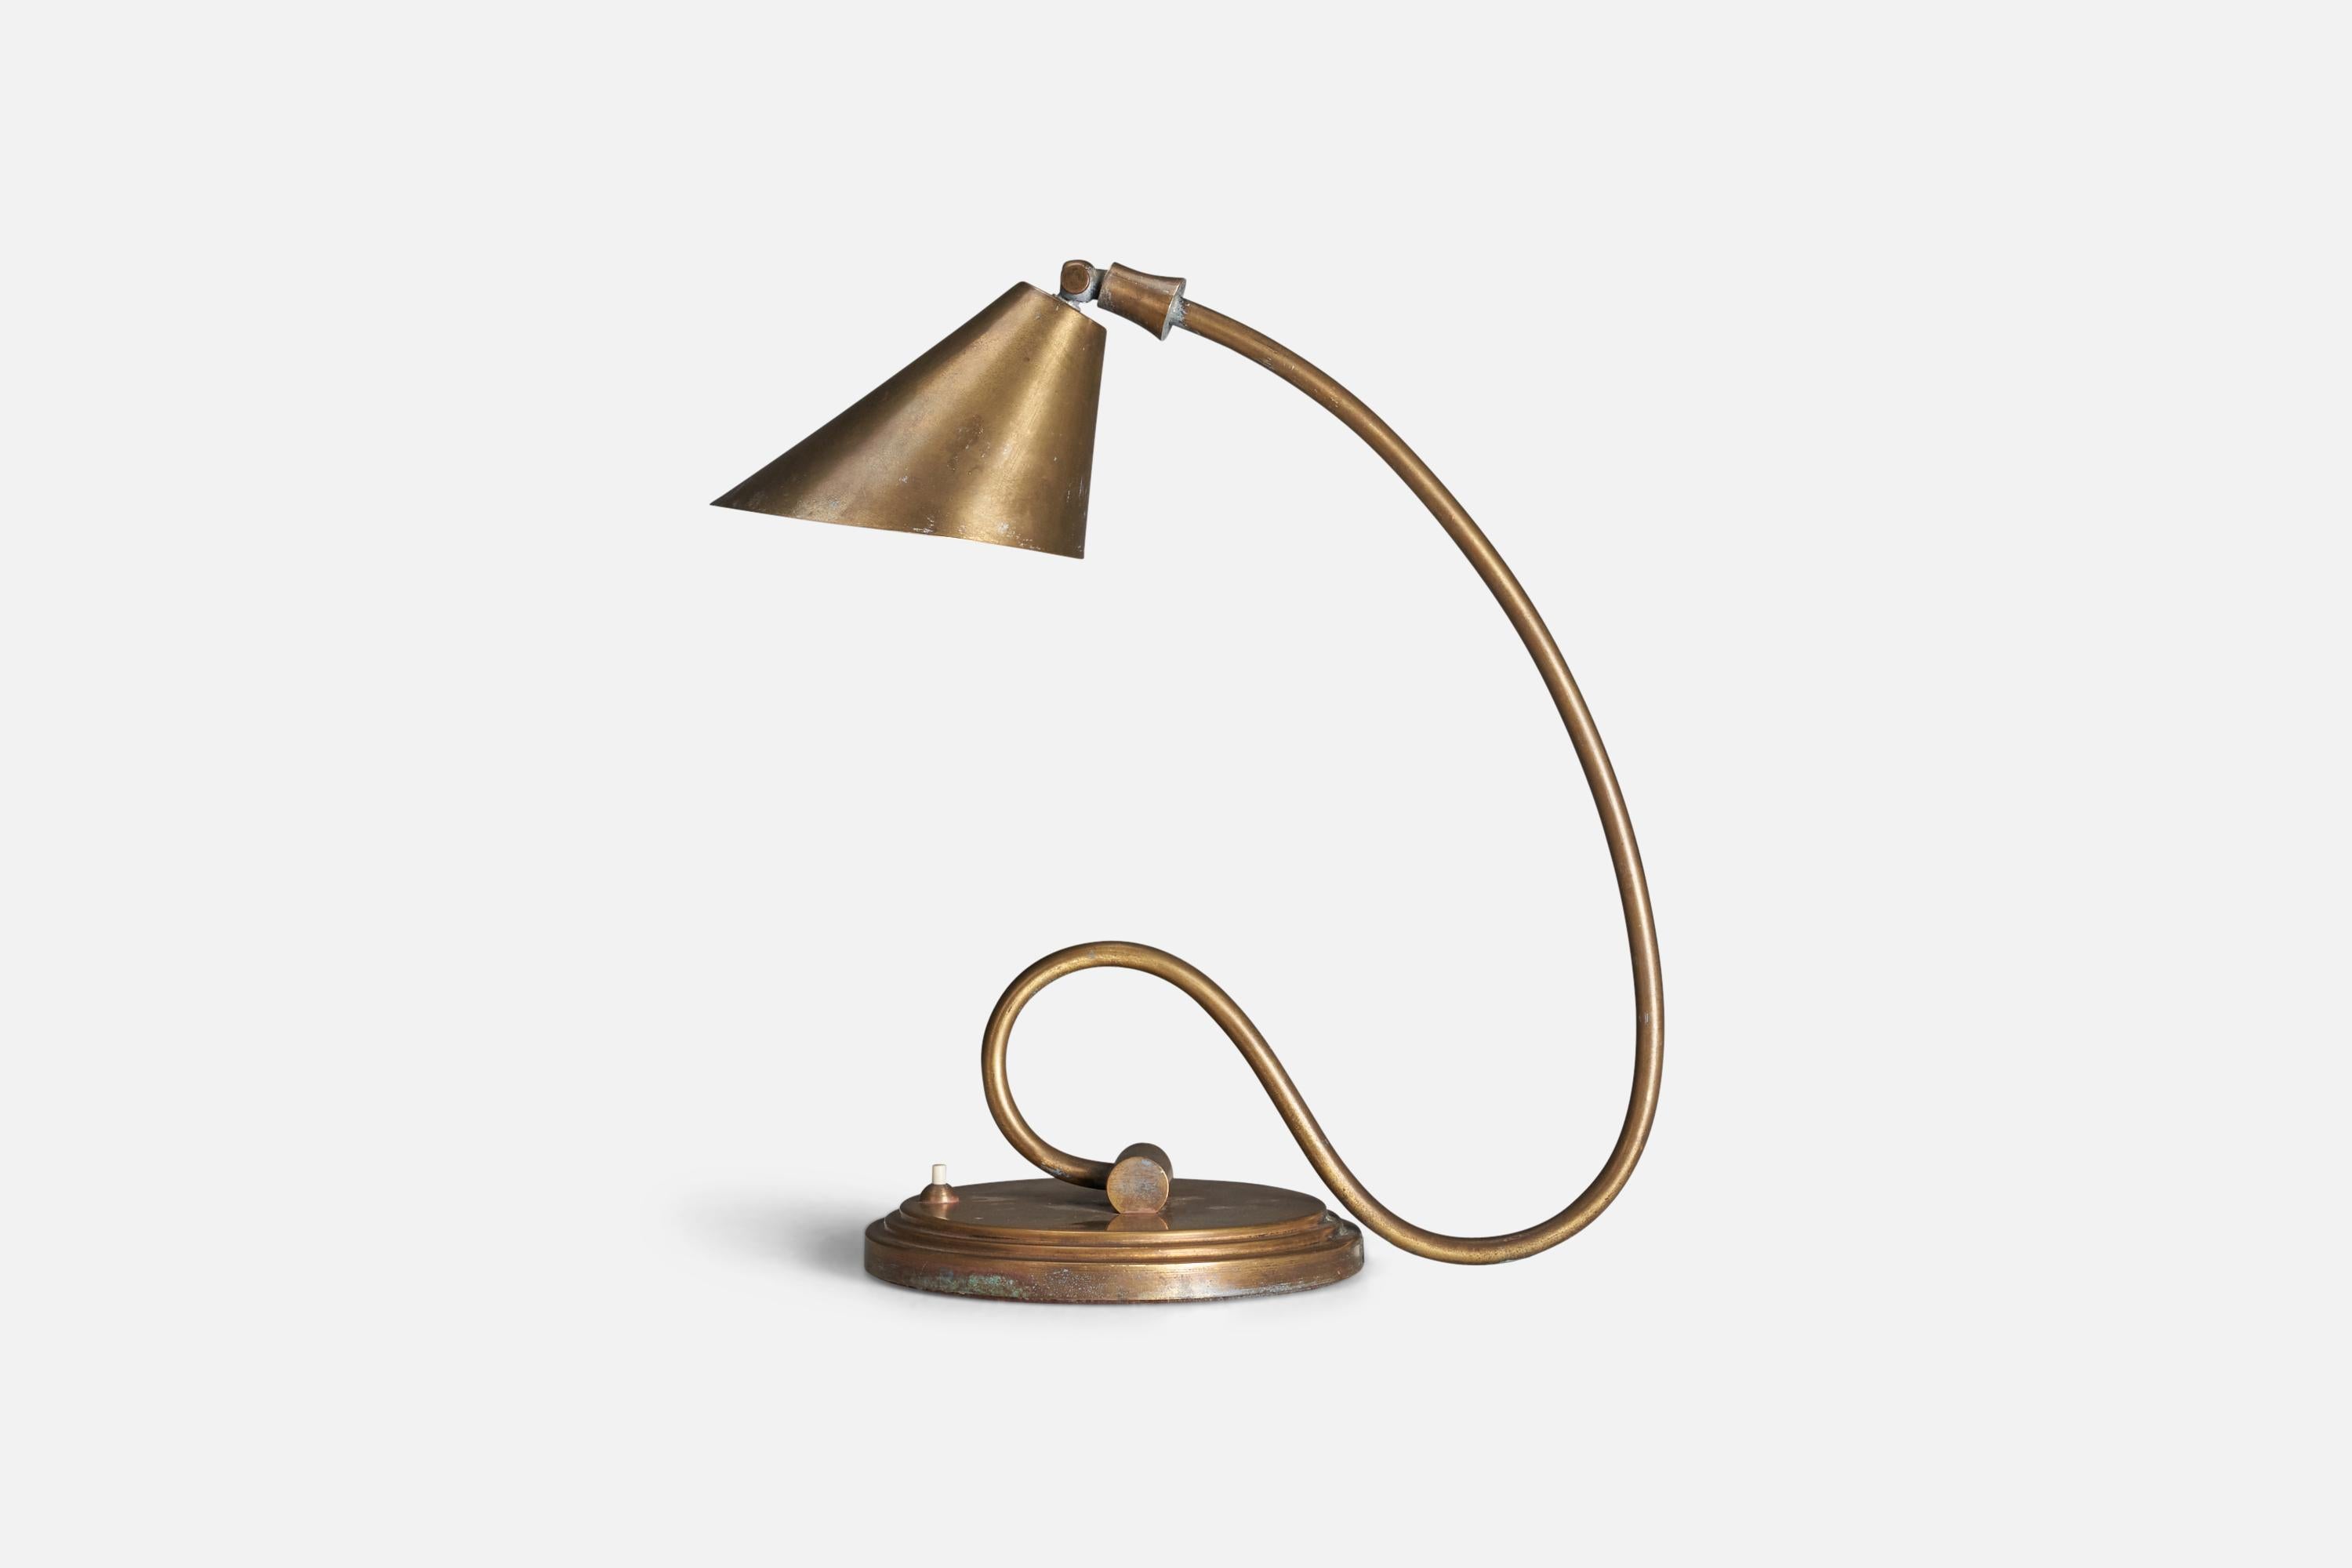 A brass table lamp designed and produced by an Italian Designer, Italy, 1930s.

Socket takes E-14 bulb.

There is no maximum wattage stated on the fixture.